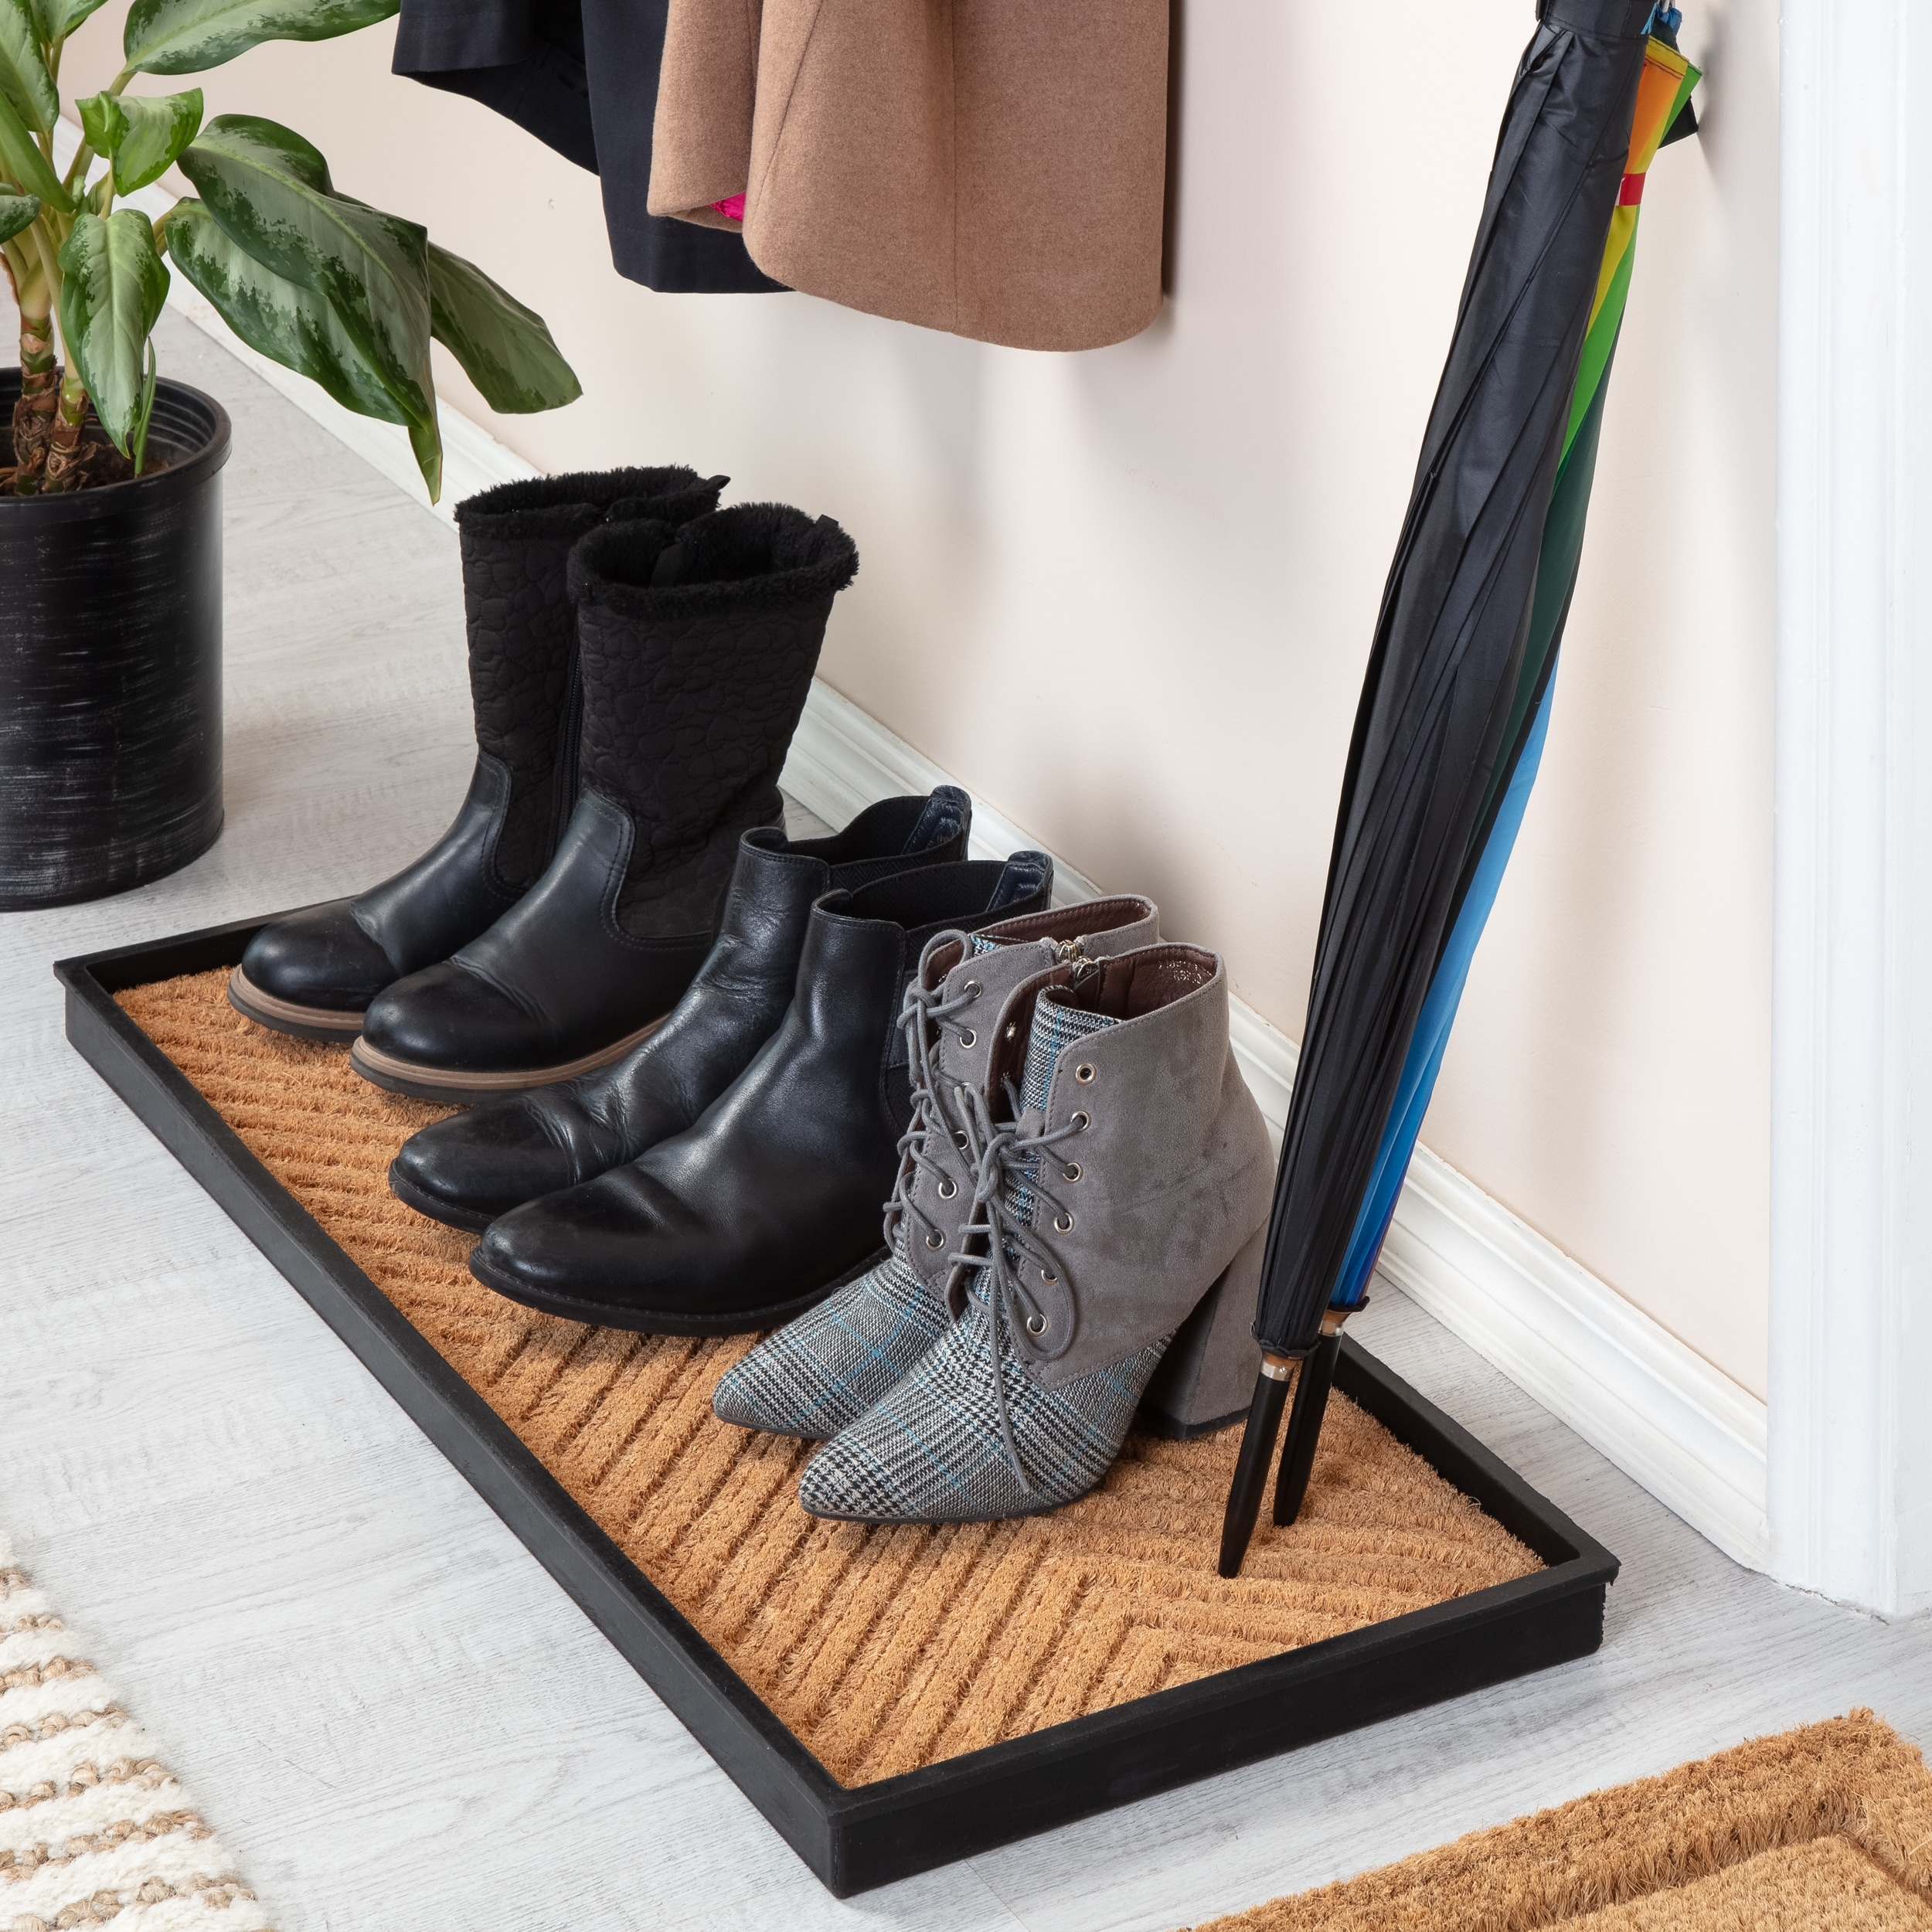 Jani Natural & Recycled Rubber Boot Tray with Cross Embossed Coir